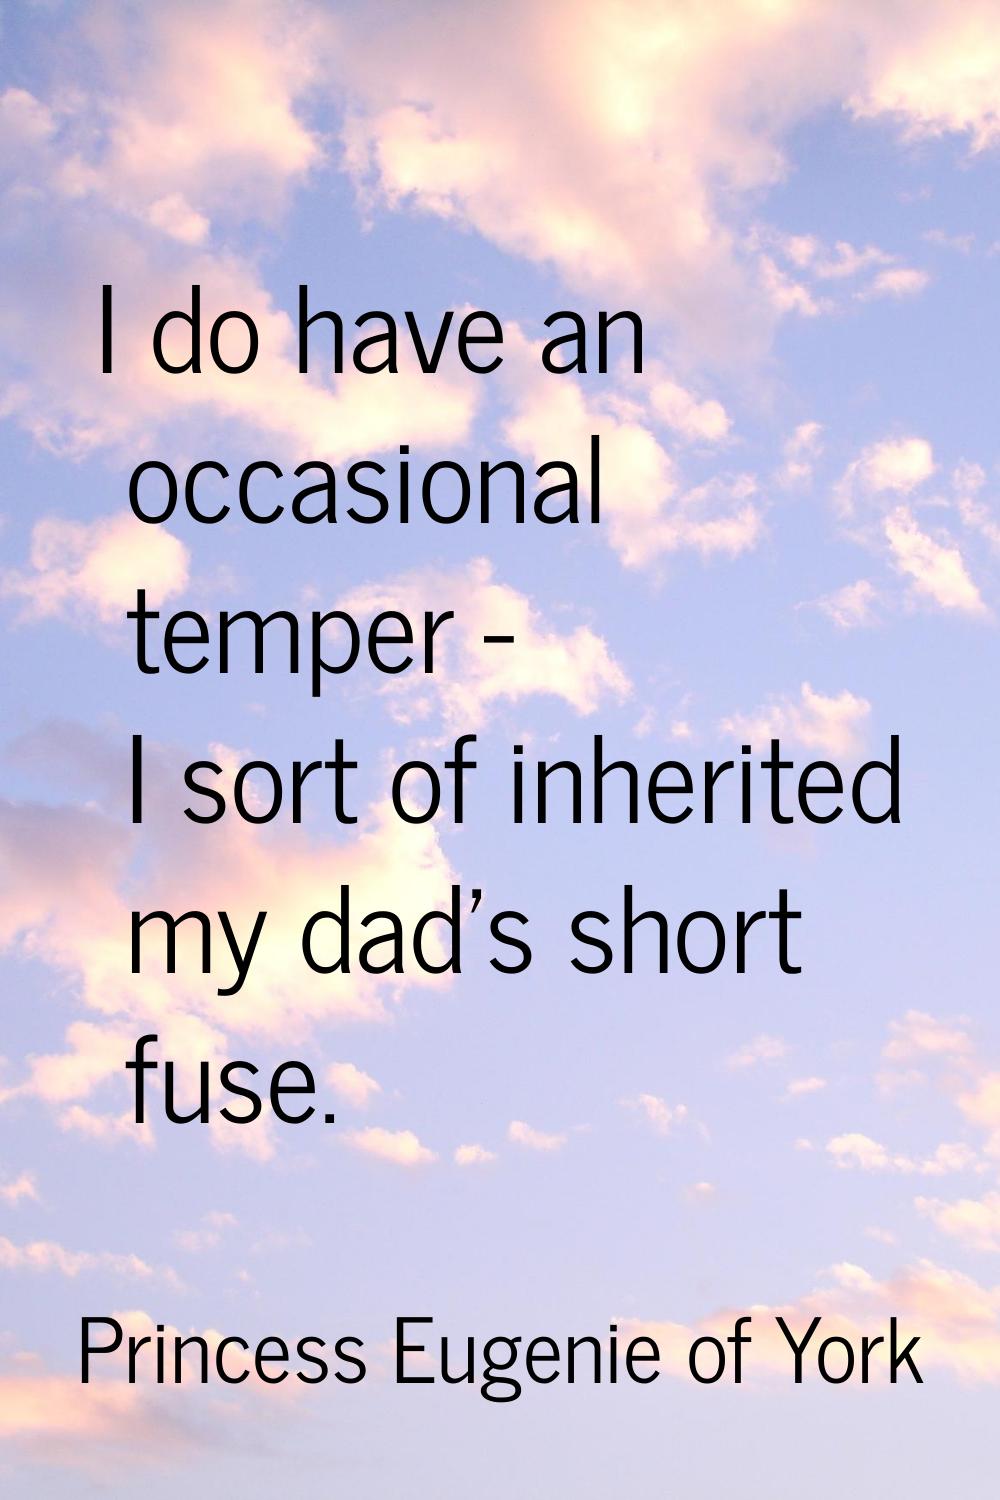 I do have an occasional temper - I sort of inherited my dad's short fuse.